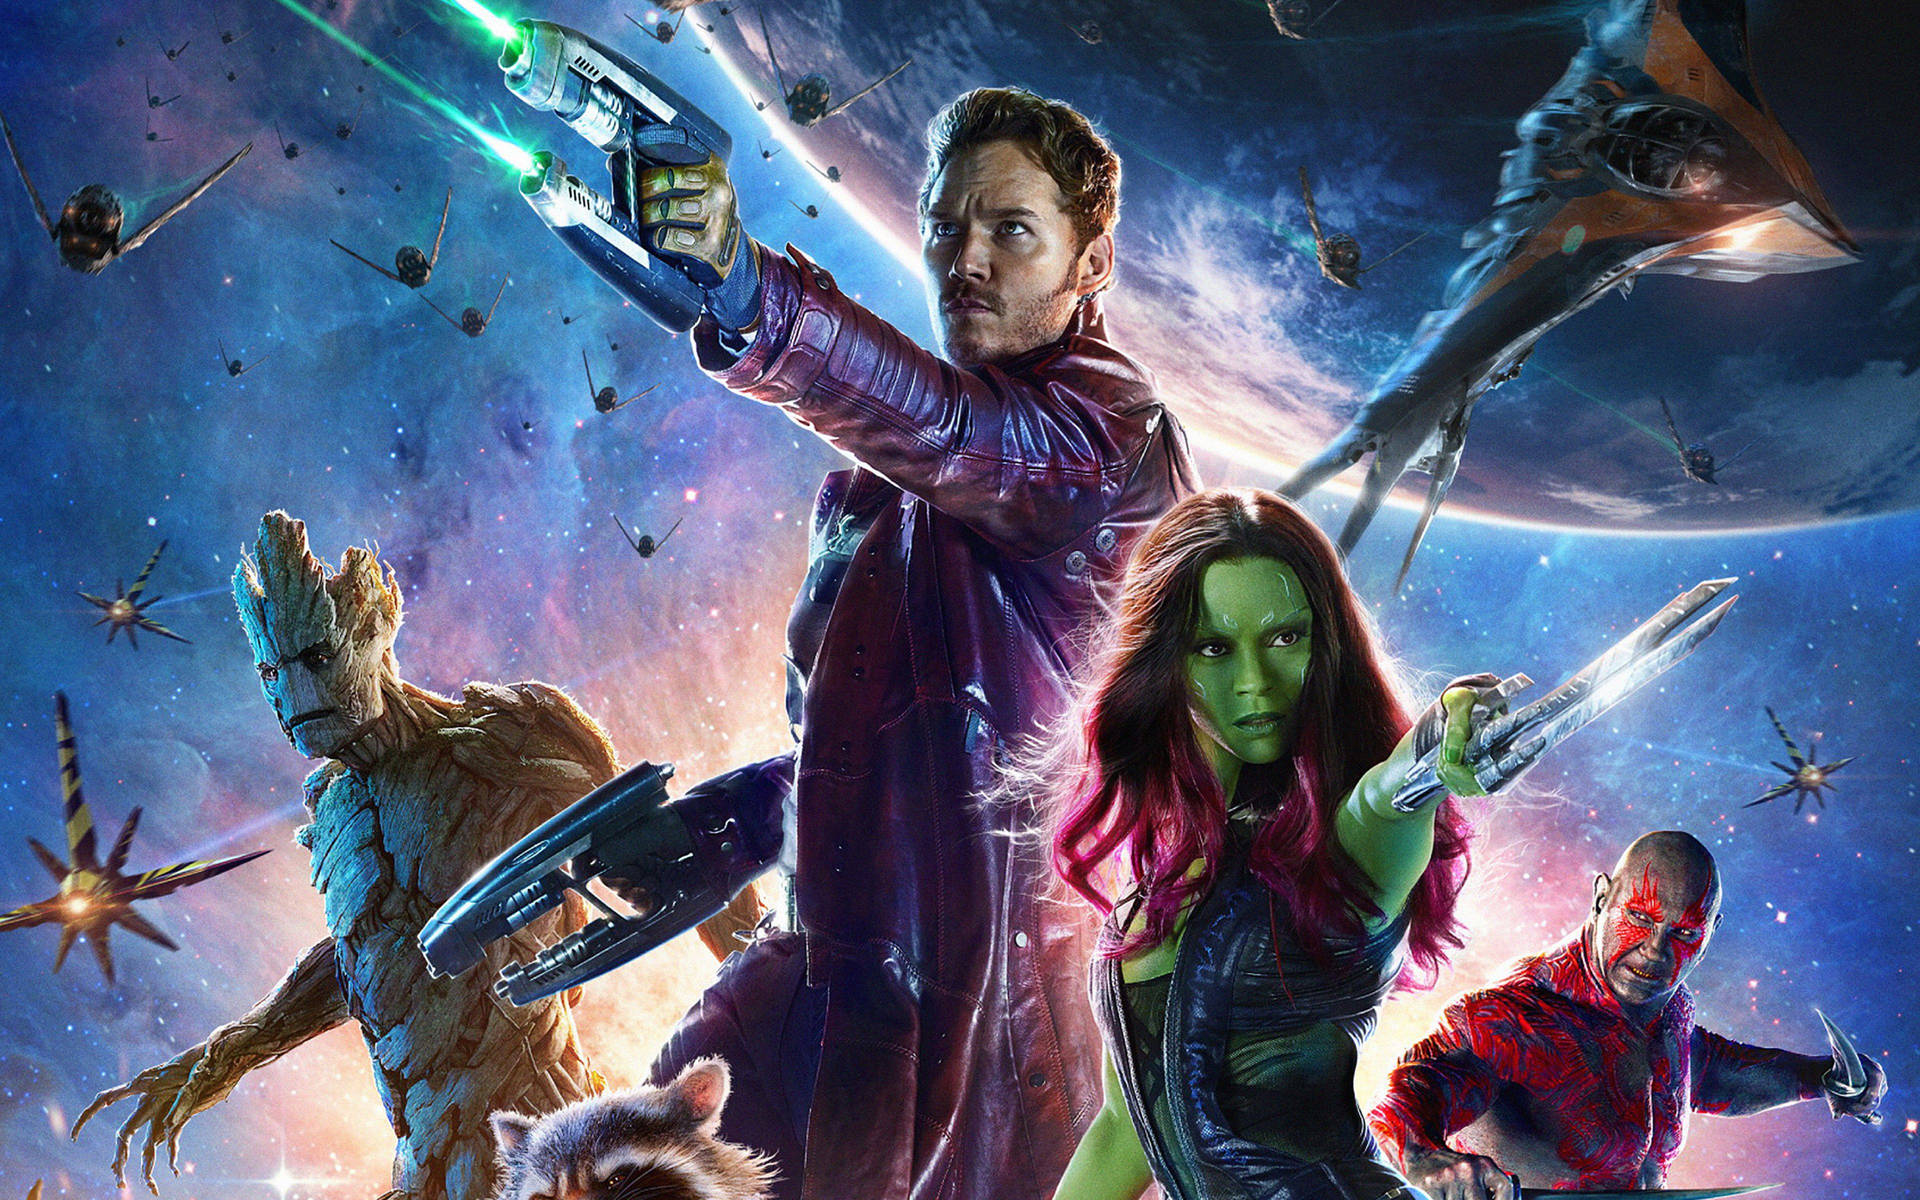 Get ready to join the Guardians of the Galaxy on this amazing cosmic adventure! Wallpaper